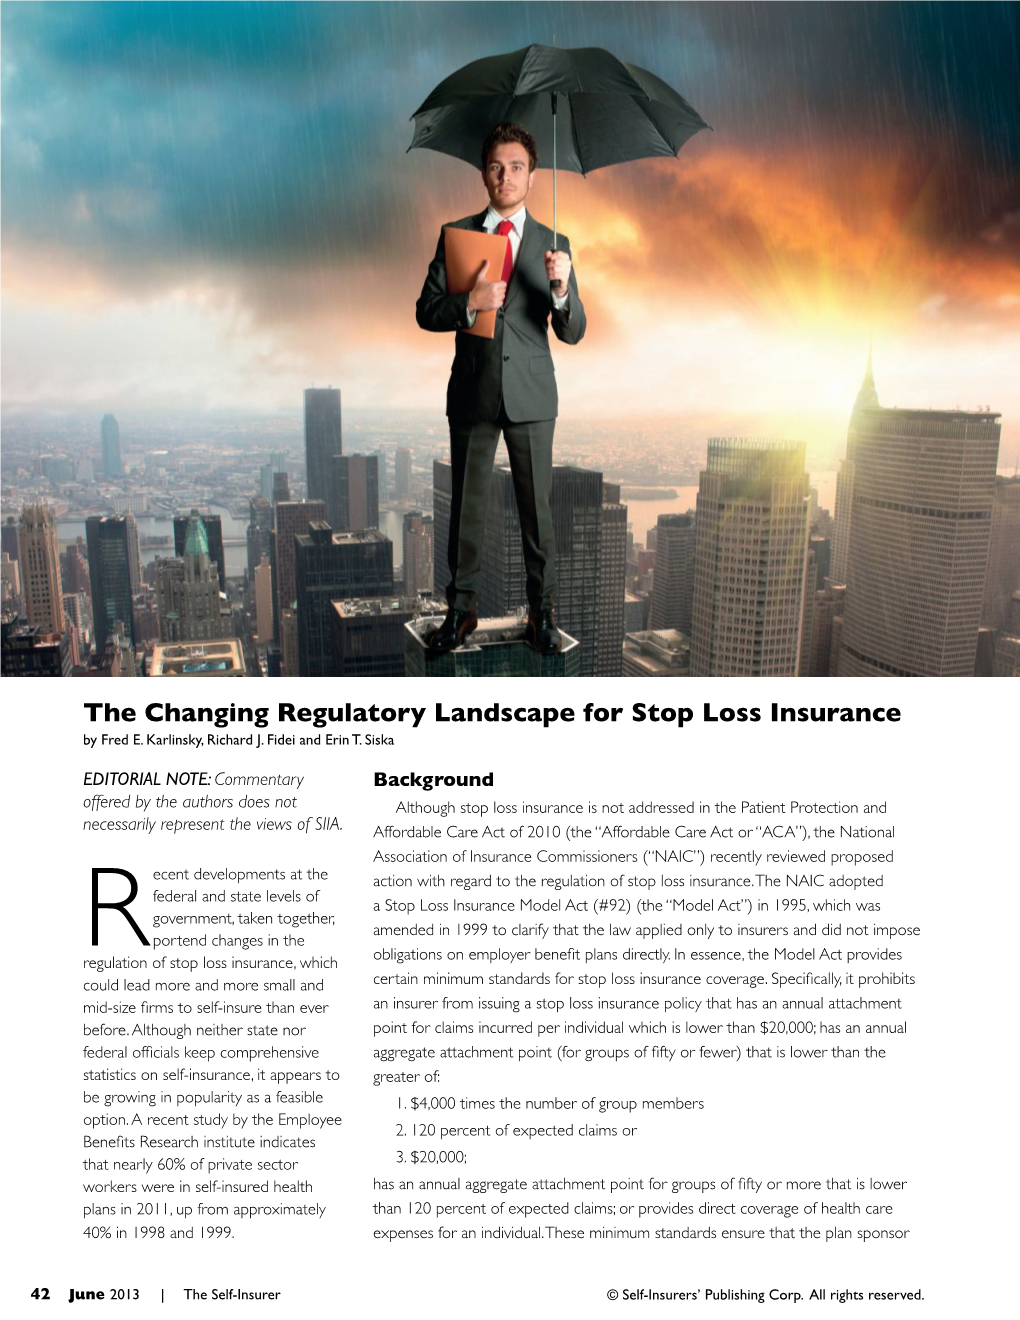 The Changing Regulatory Landscape for Stop Loss Insurance by Fred E